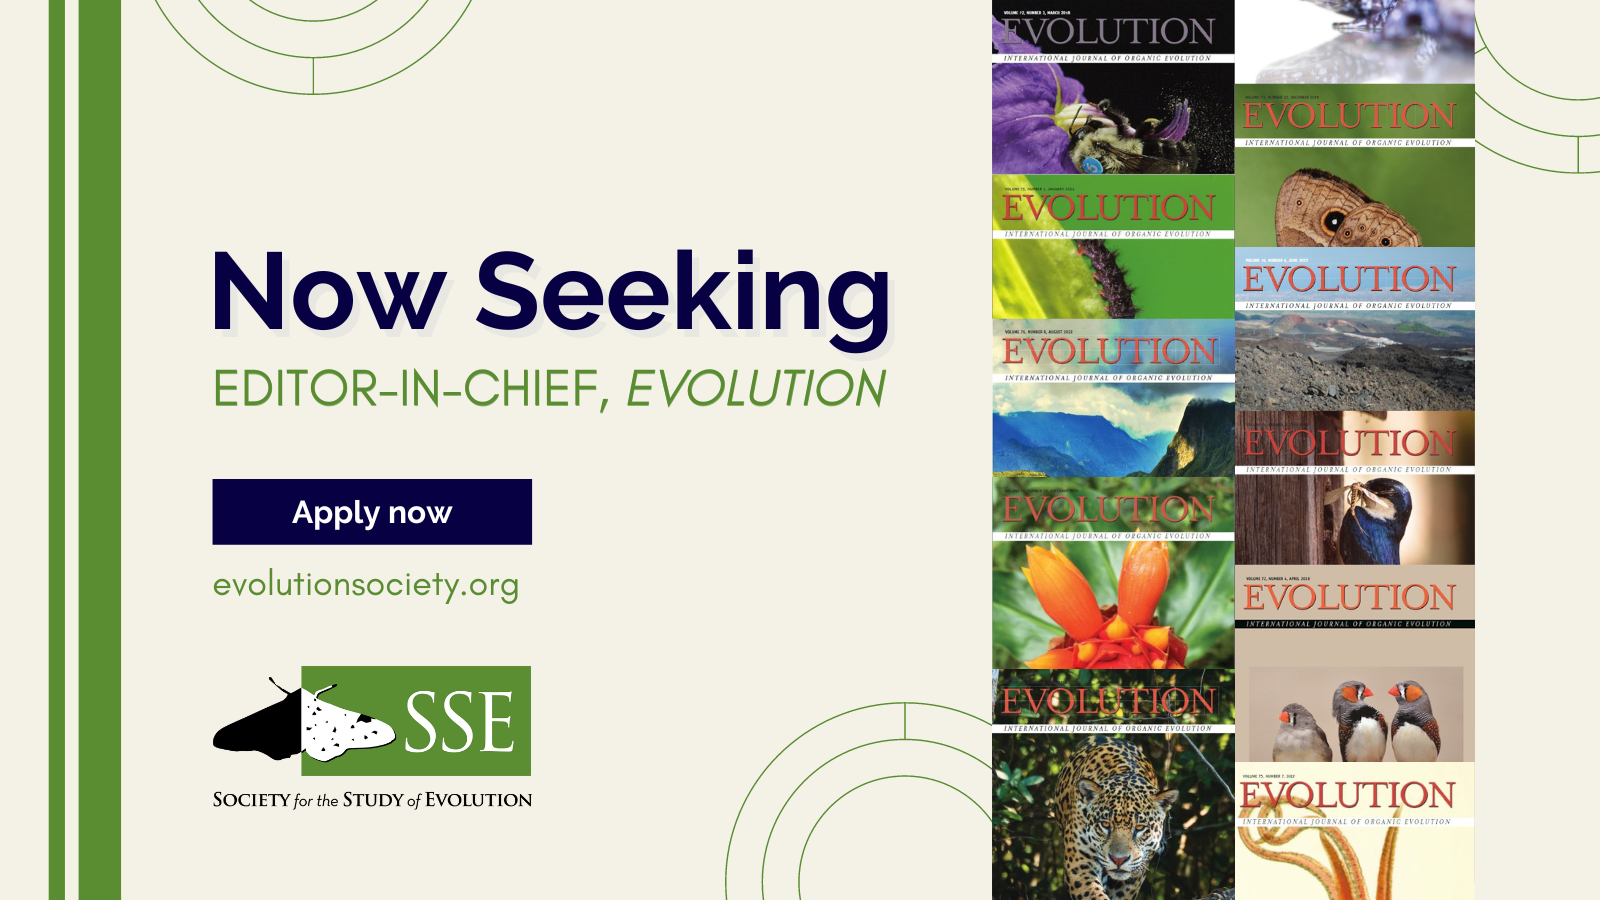 Text: Now Seeking Editor-in-Chief, Evolution. Apply Now. evolutionsociety.org. SSE peppered moth logo. Overlapping Evolution journal covers are lined up to the side of the text.